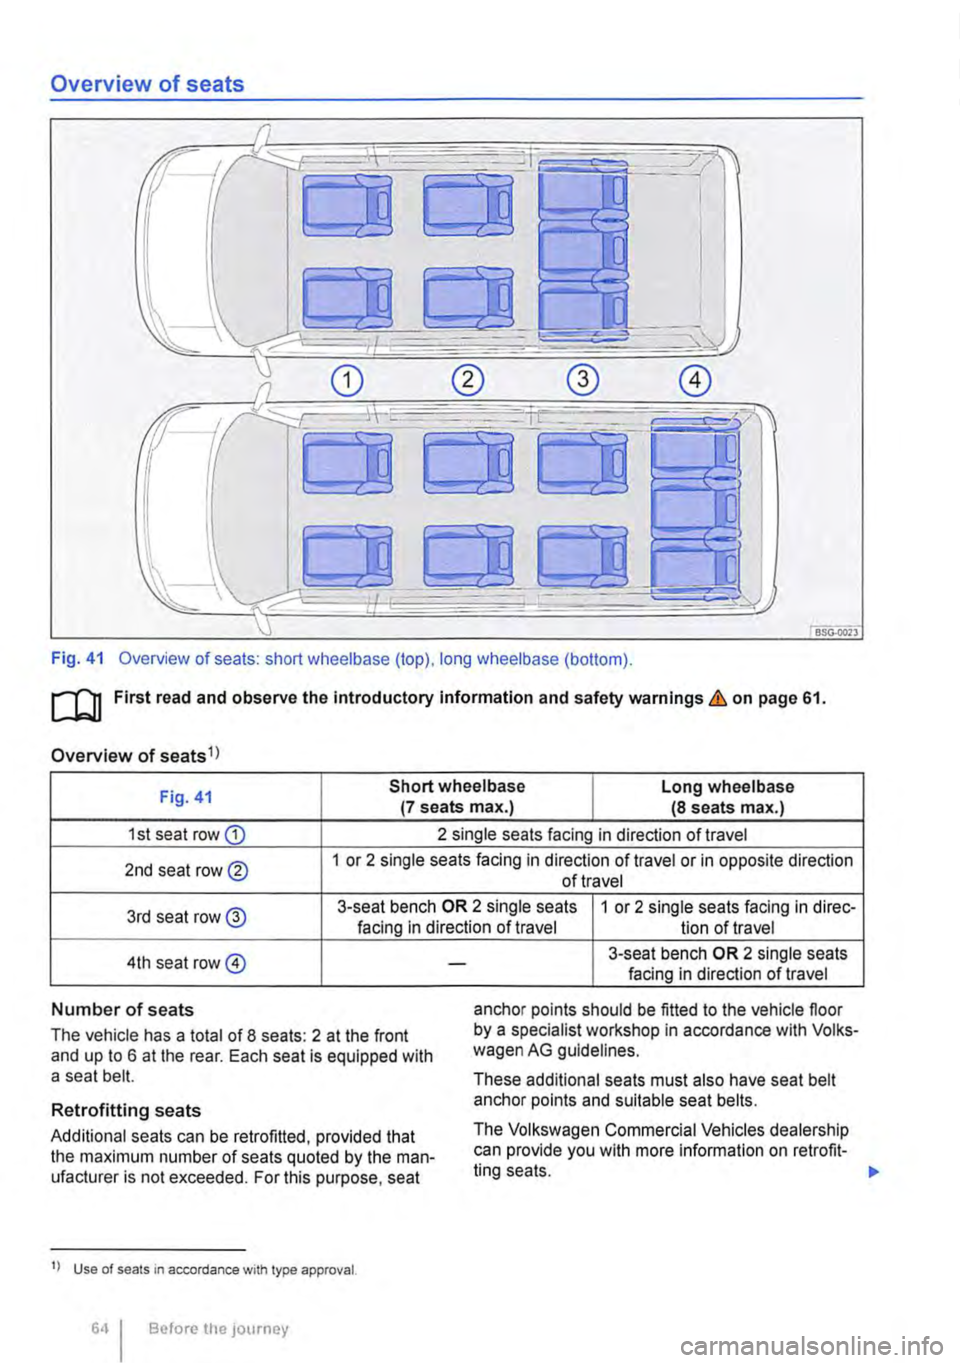 VOLKSWAGEN TRANSPORTER 2011  Owners Manual Overview of seats 
Fig. 41 Overview of seats: short wheelbase (top), long wheelbase (bottom). 
ro First read and observe the Introductory Information and safety warnings & on page 61. 
Overview of sea